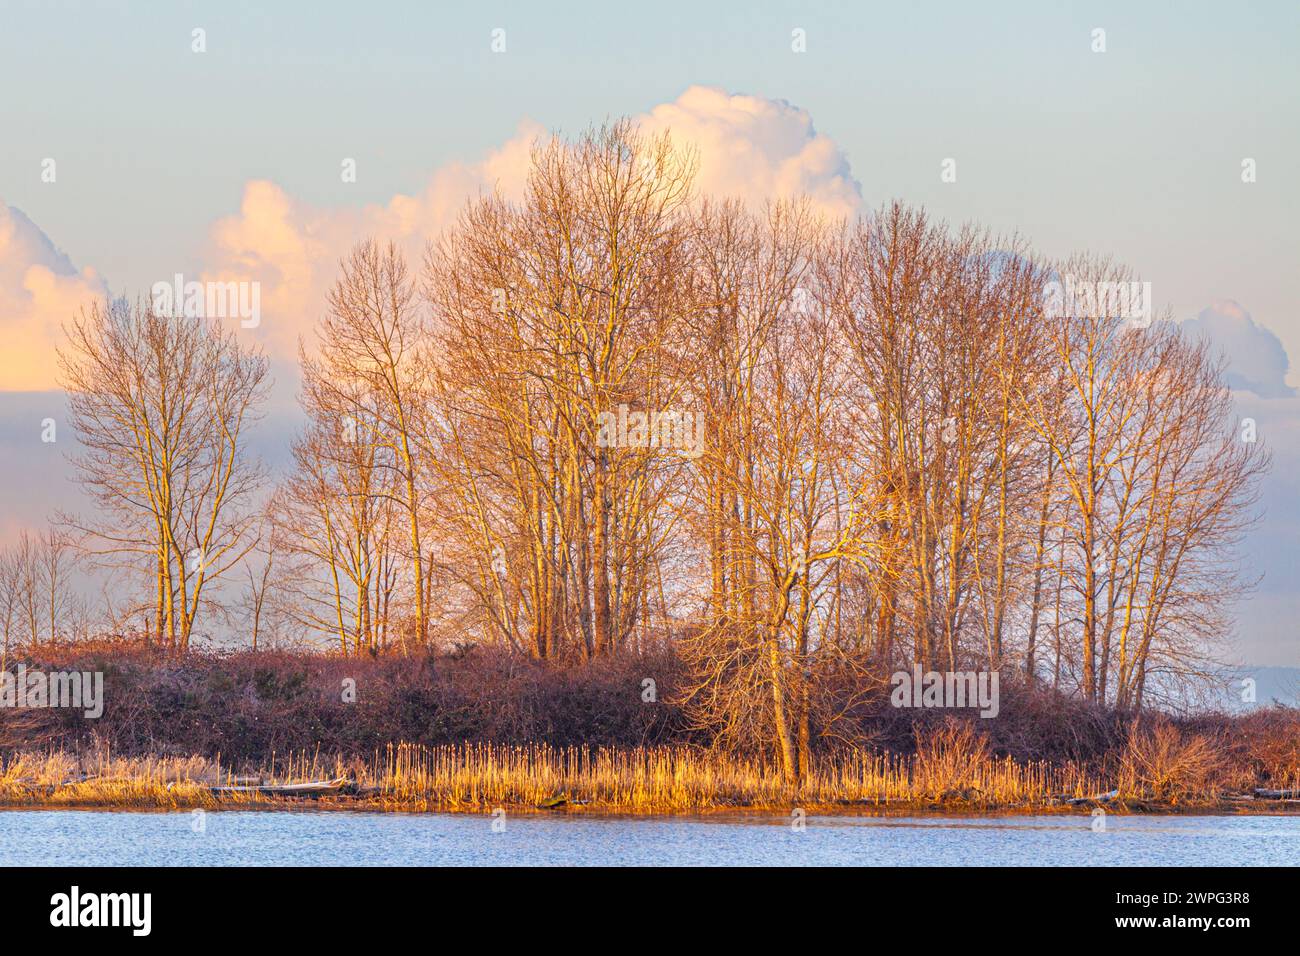 Early morning light on Shady Island as seen from Steveston in Canada Stock Photo